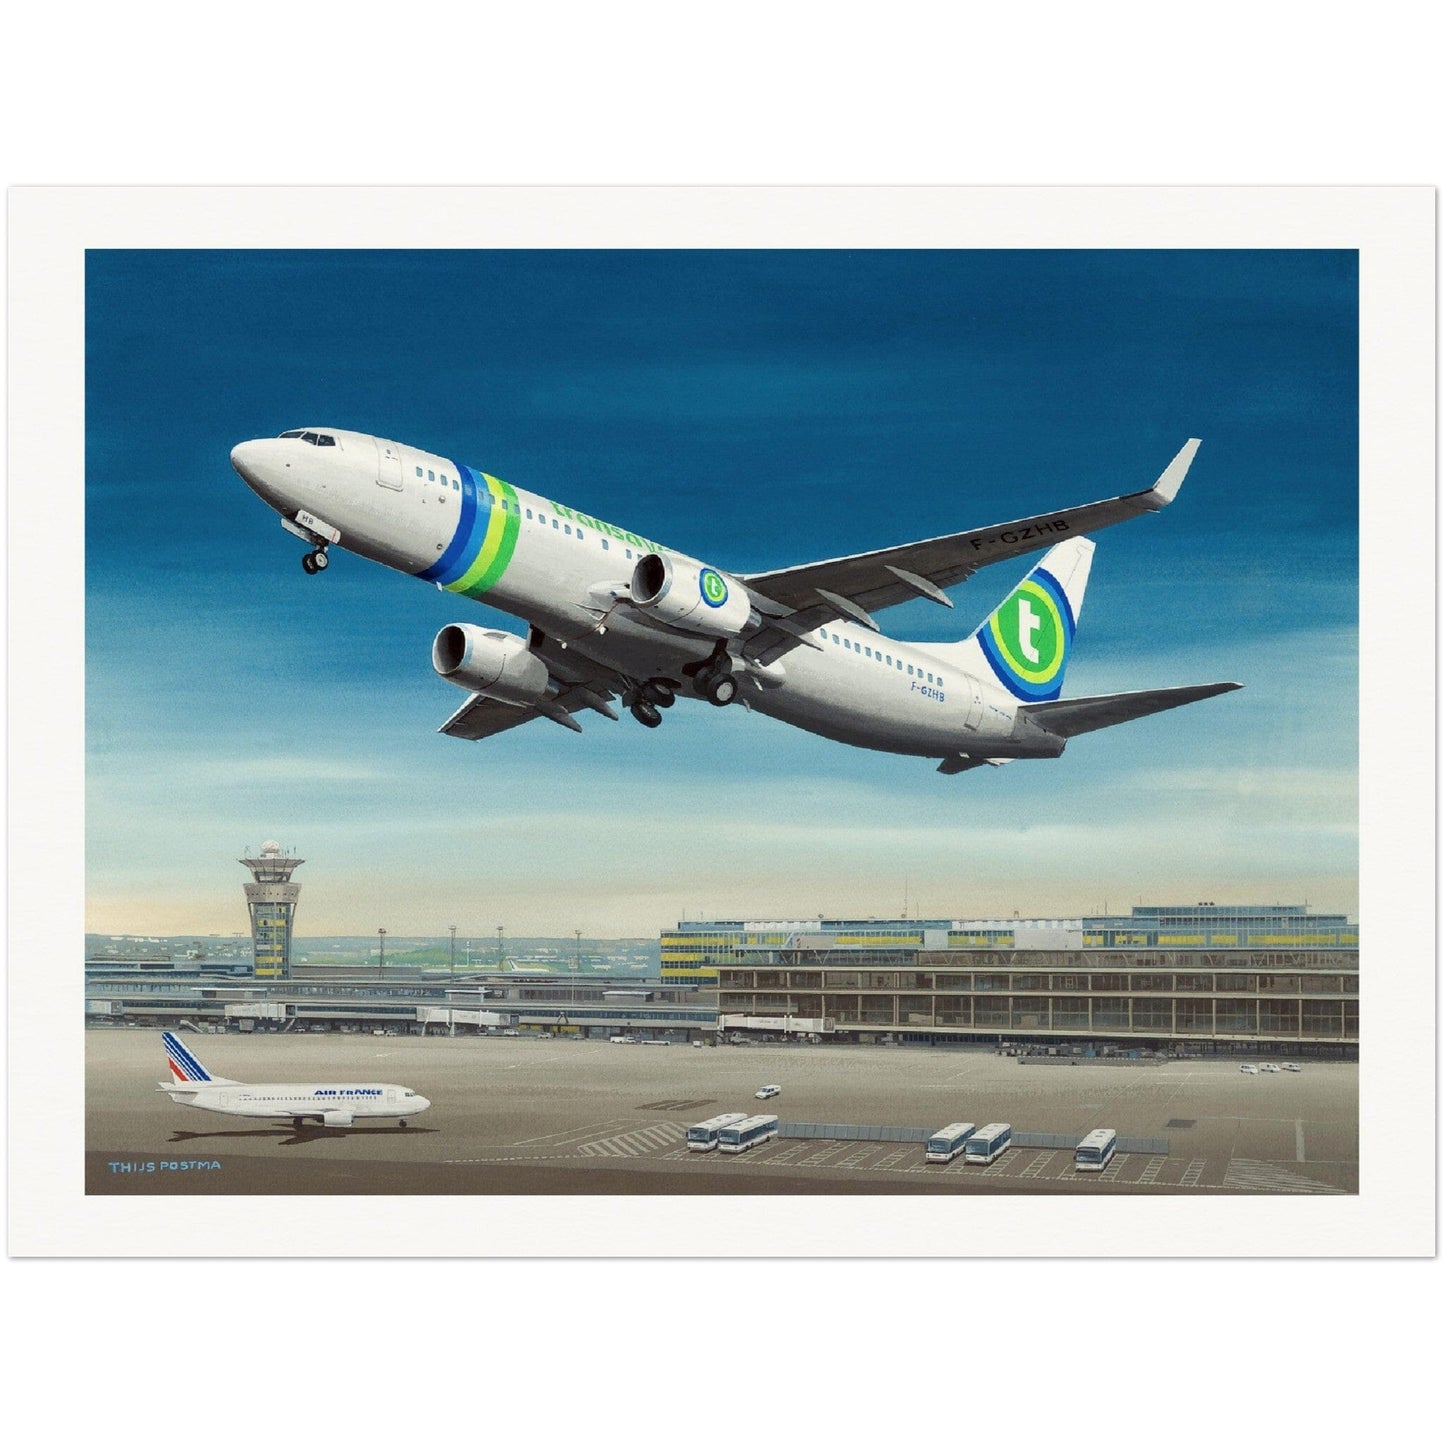 Thijs Postma - Poster - Boeing 737-800 Transavia Orly Poster Only TP Aviation Art 60x80 cm / 24x32″ 